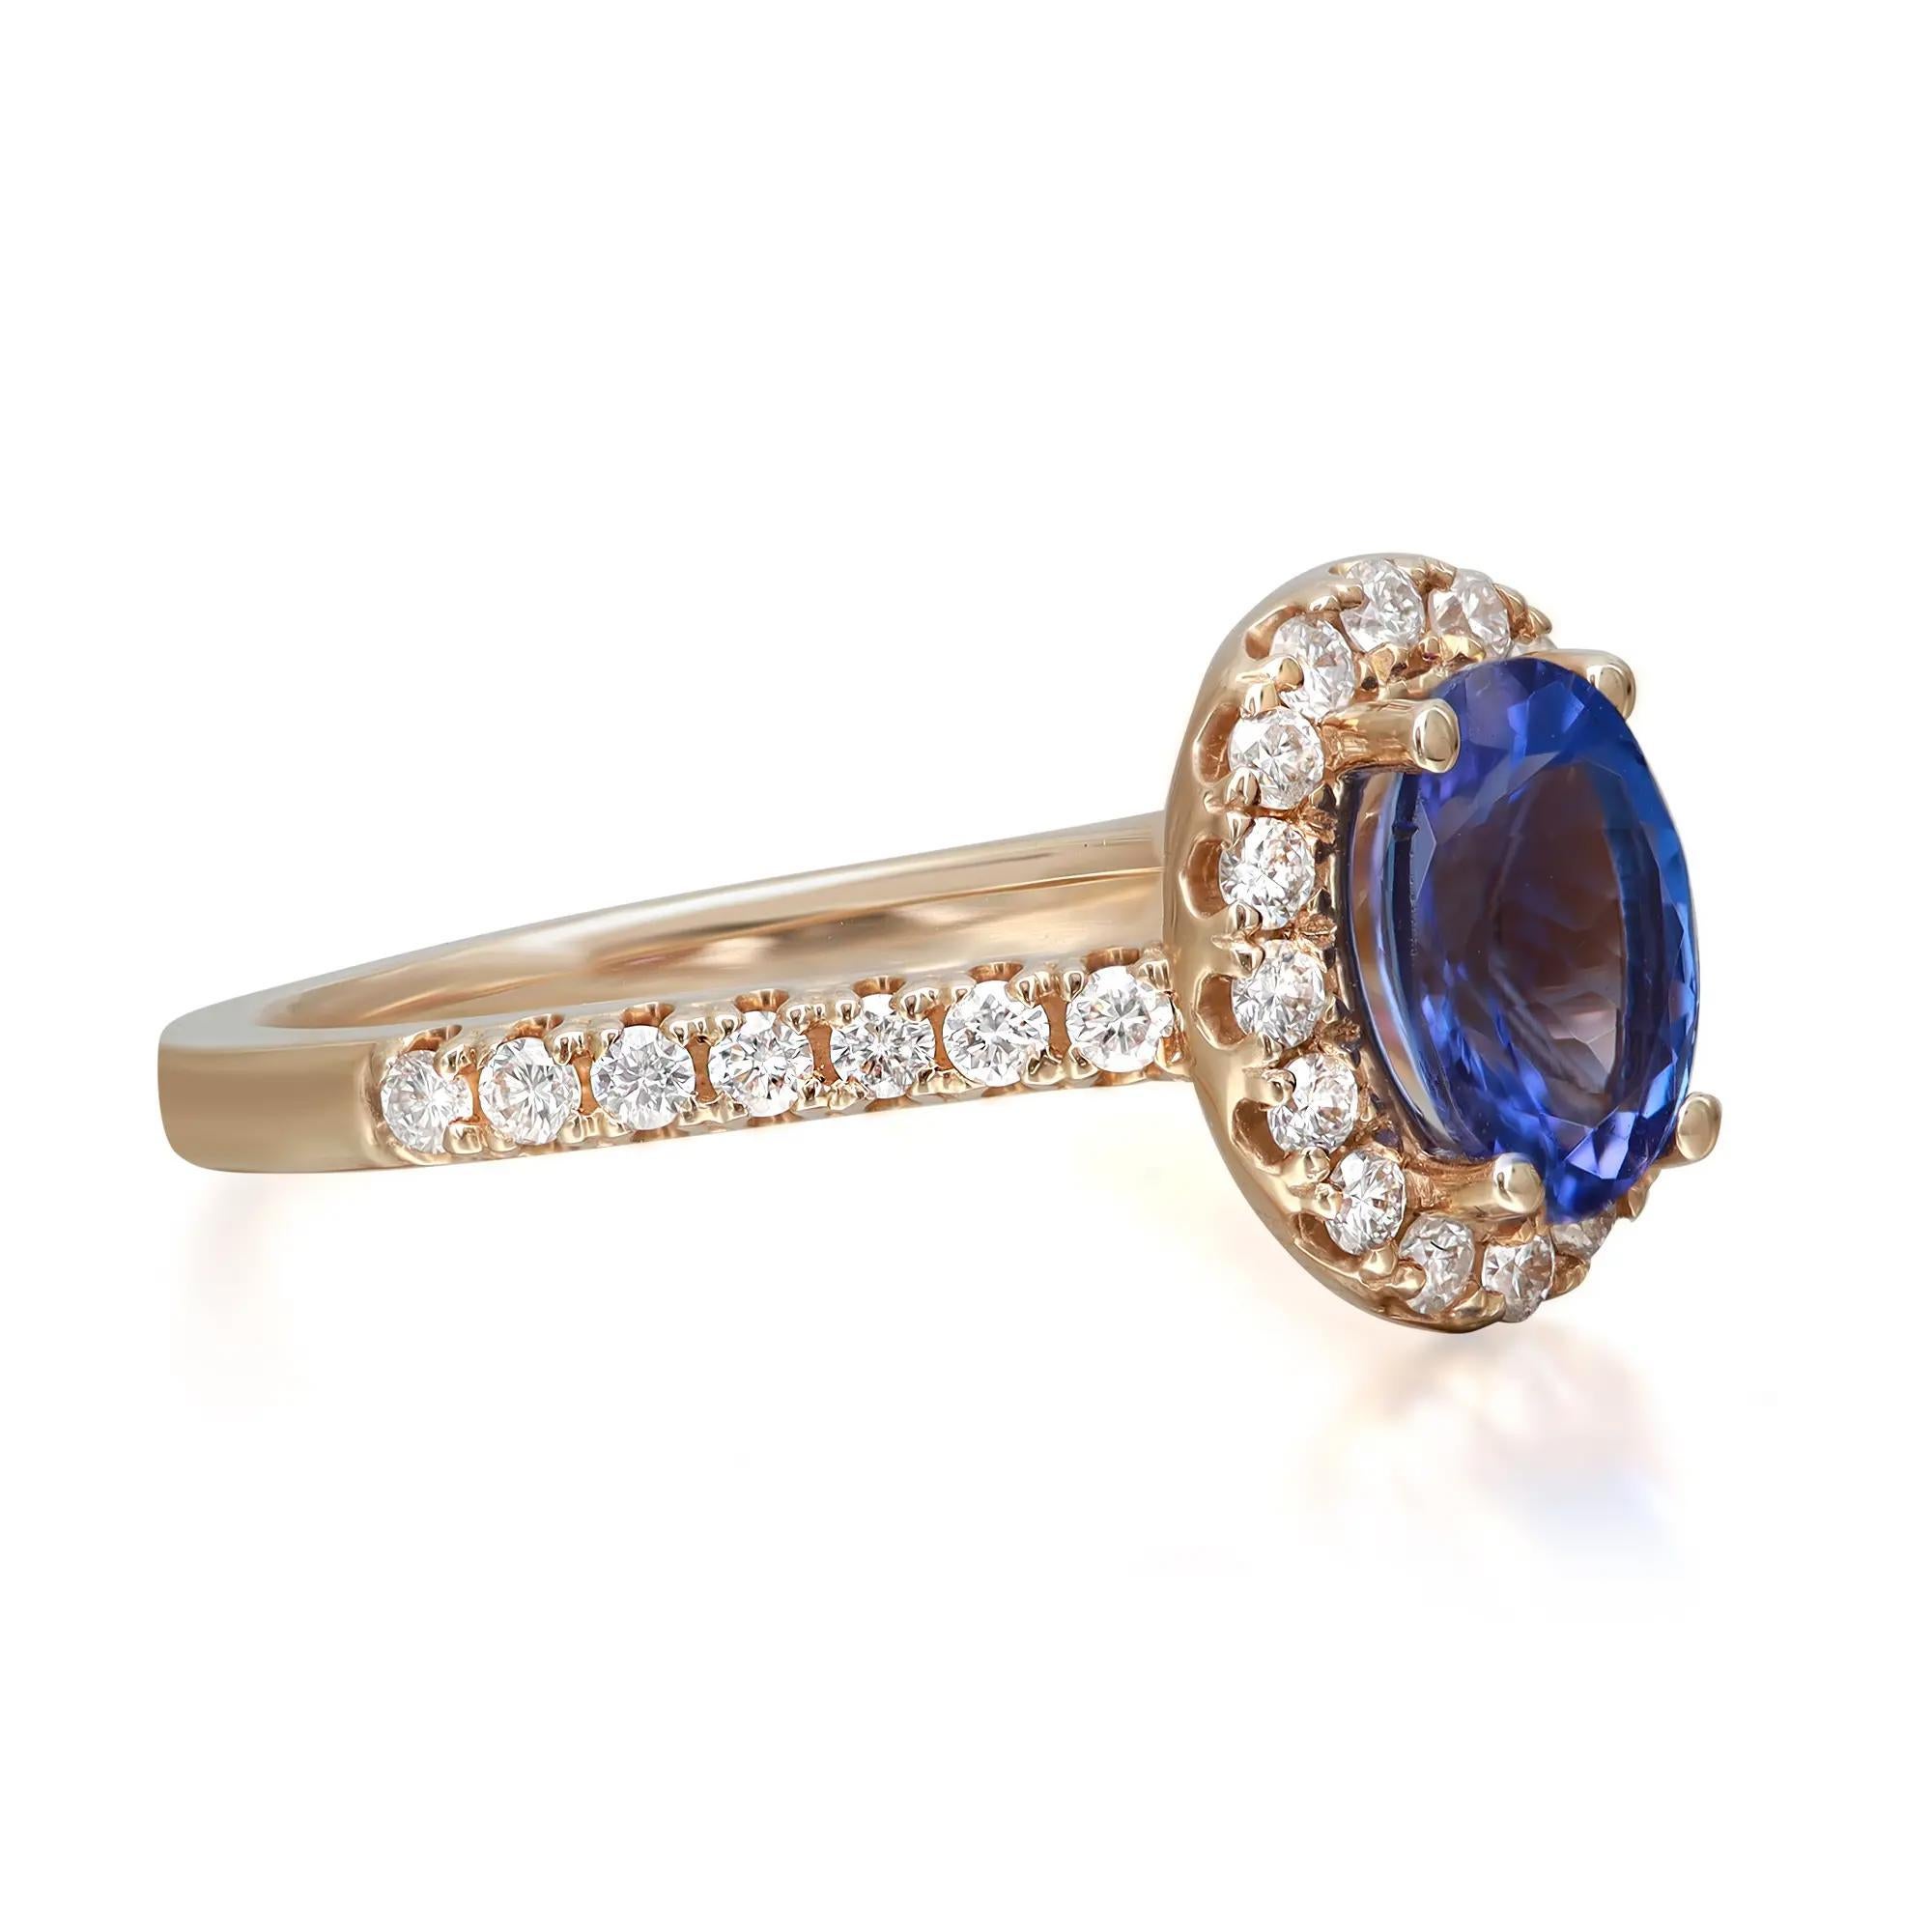 This beautiful Tanzanite cocktail ring is crafted in 14k yellow gold, it features a halo of sparkling round brilliant cut diamonds orbiting a gorgeous, hand chosen, oval shaped Tanzanite with round cut diamonds accented on the band shoulders. Can be